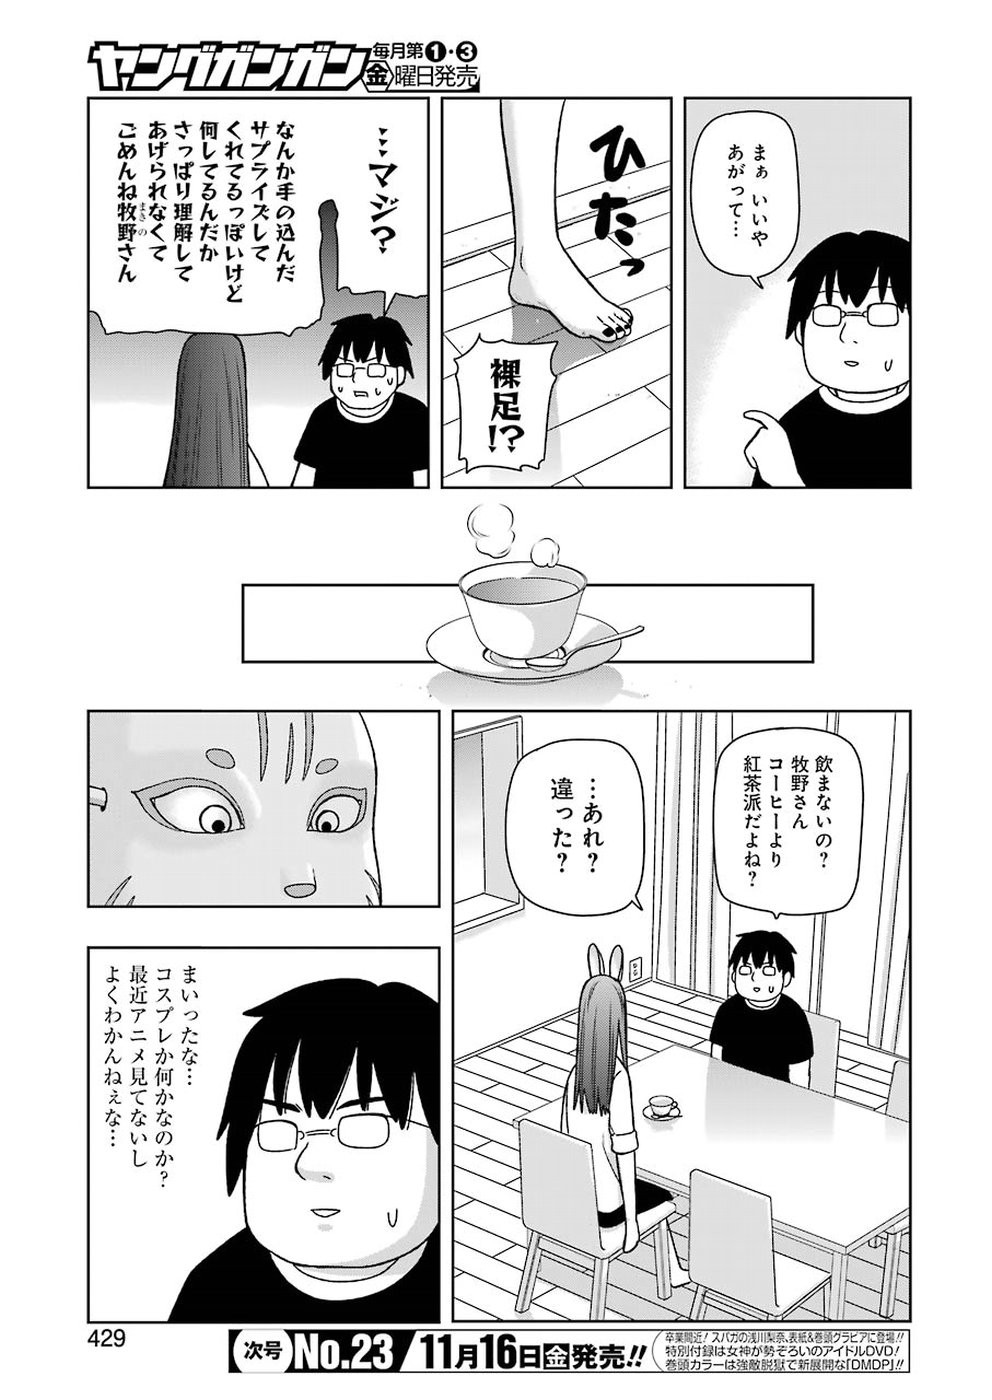 + Tic Nee-san - Chapter 176 - Page 3